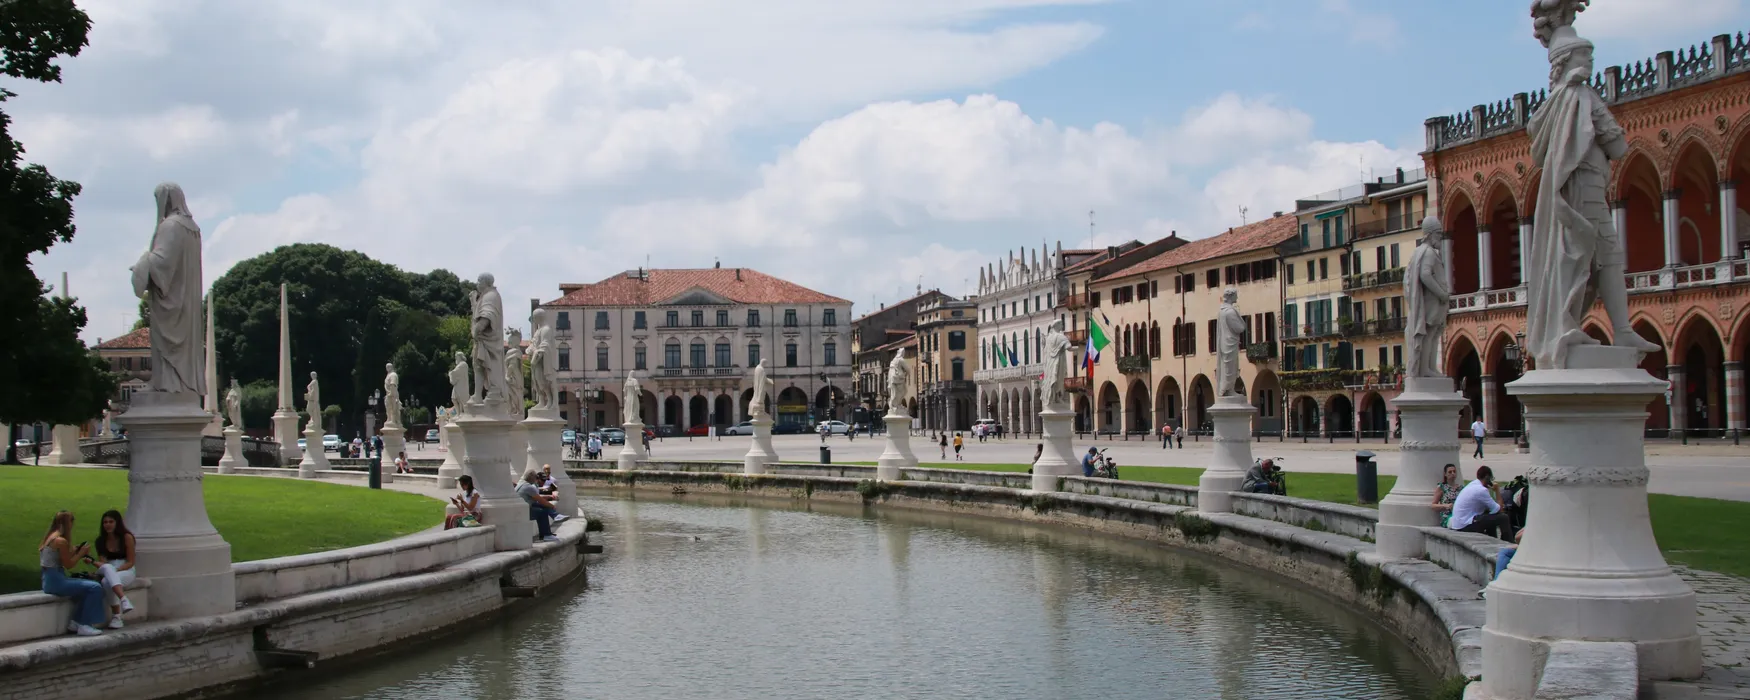 Is Padua worth visiting? Find out what to do with Viewnary